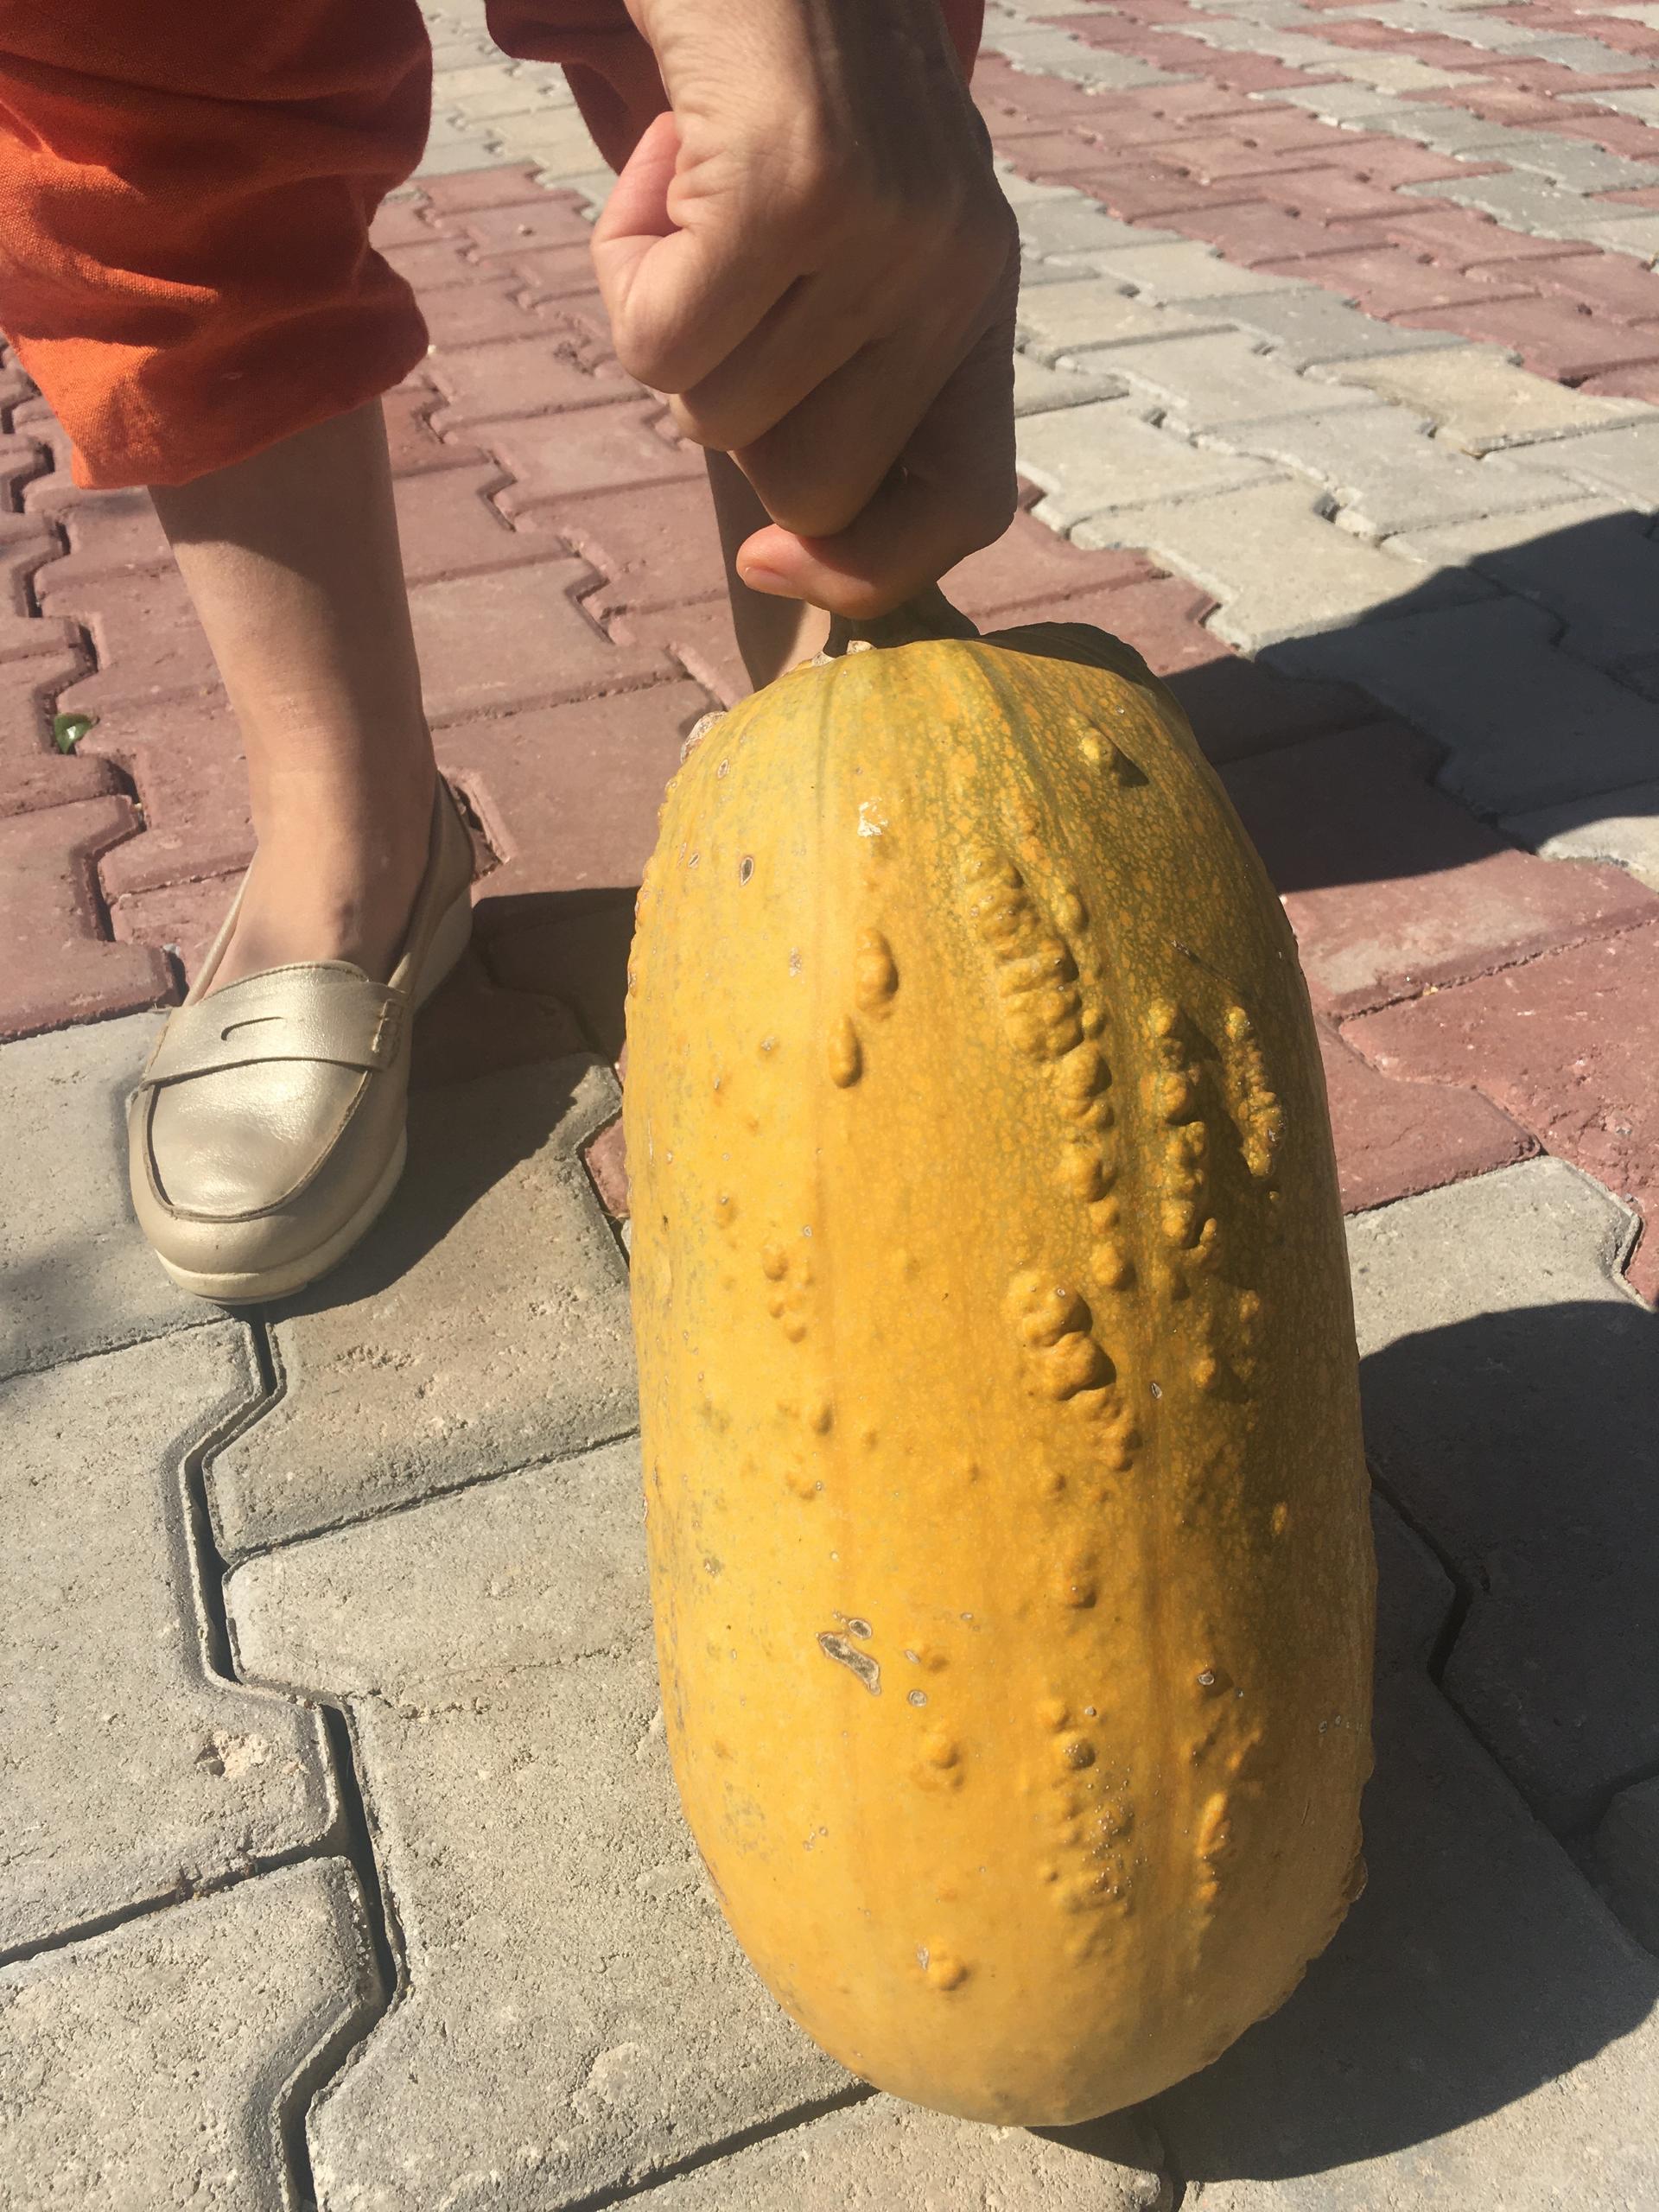 A local variety of heavy, dimpled squash.